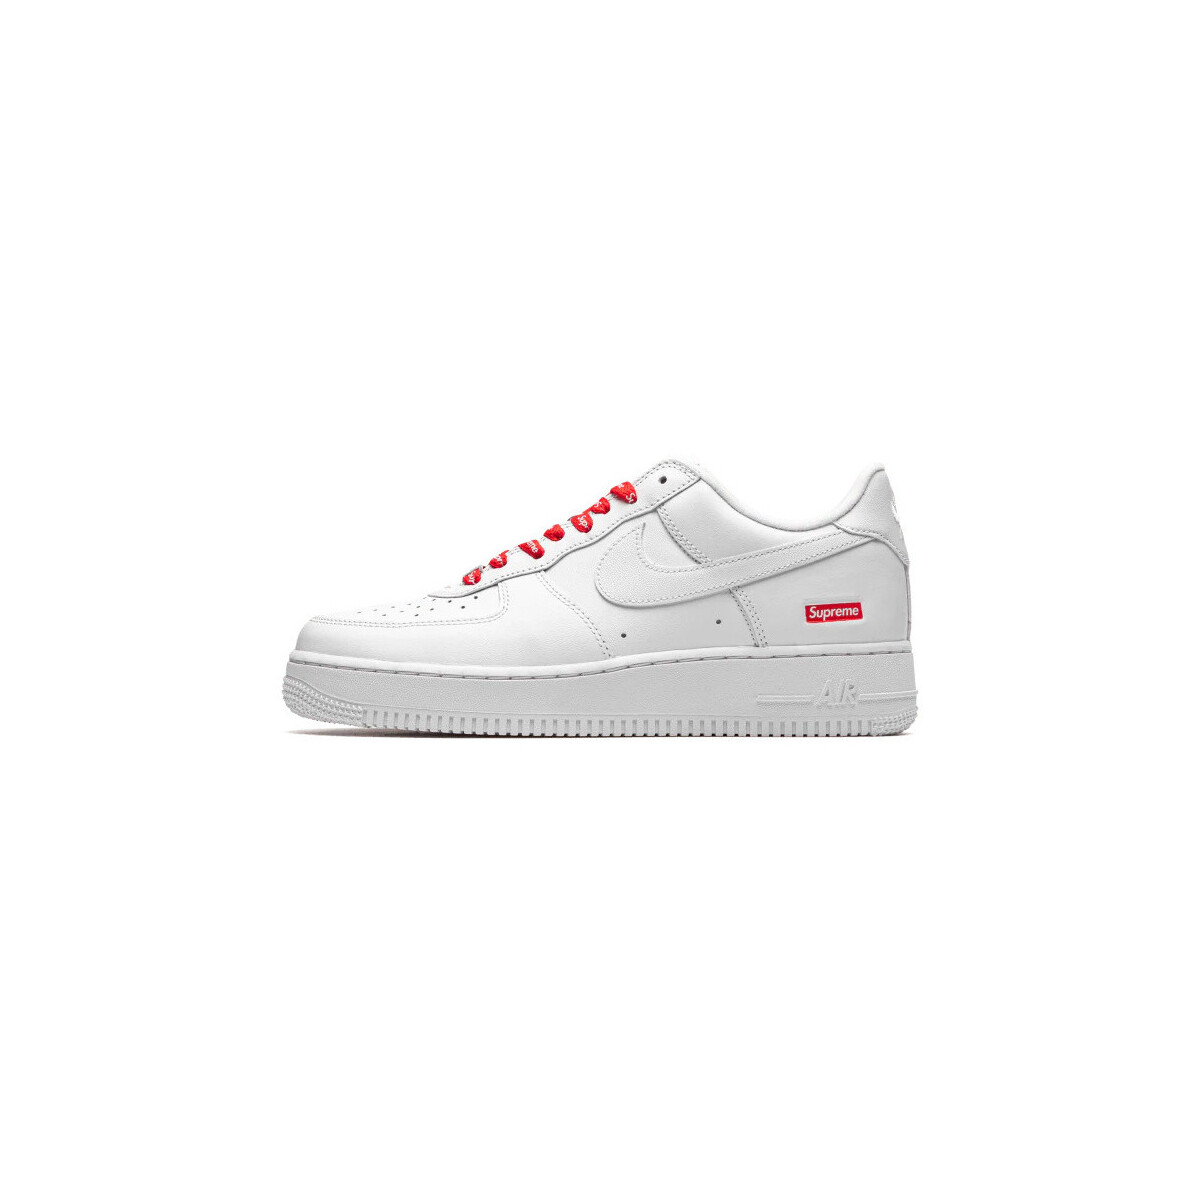 Chaussures nike air flex experience rn 7 barefoot running shoes lunarepic 7 16082 black and red for sale AIR FORCE 1 LOW WHITE SUPREME Blanc